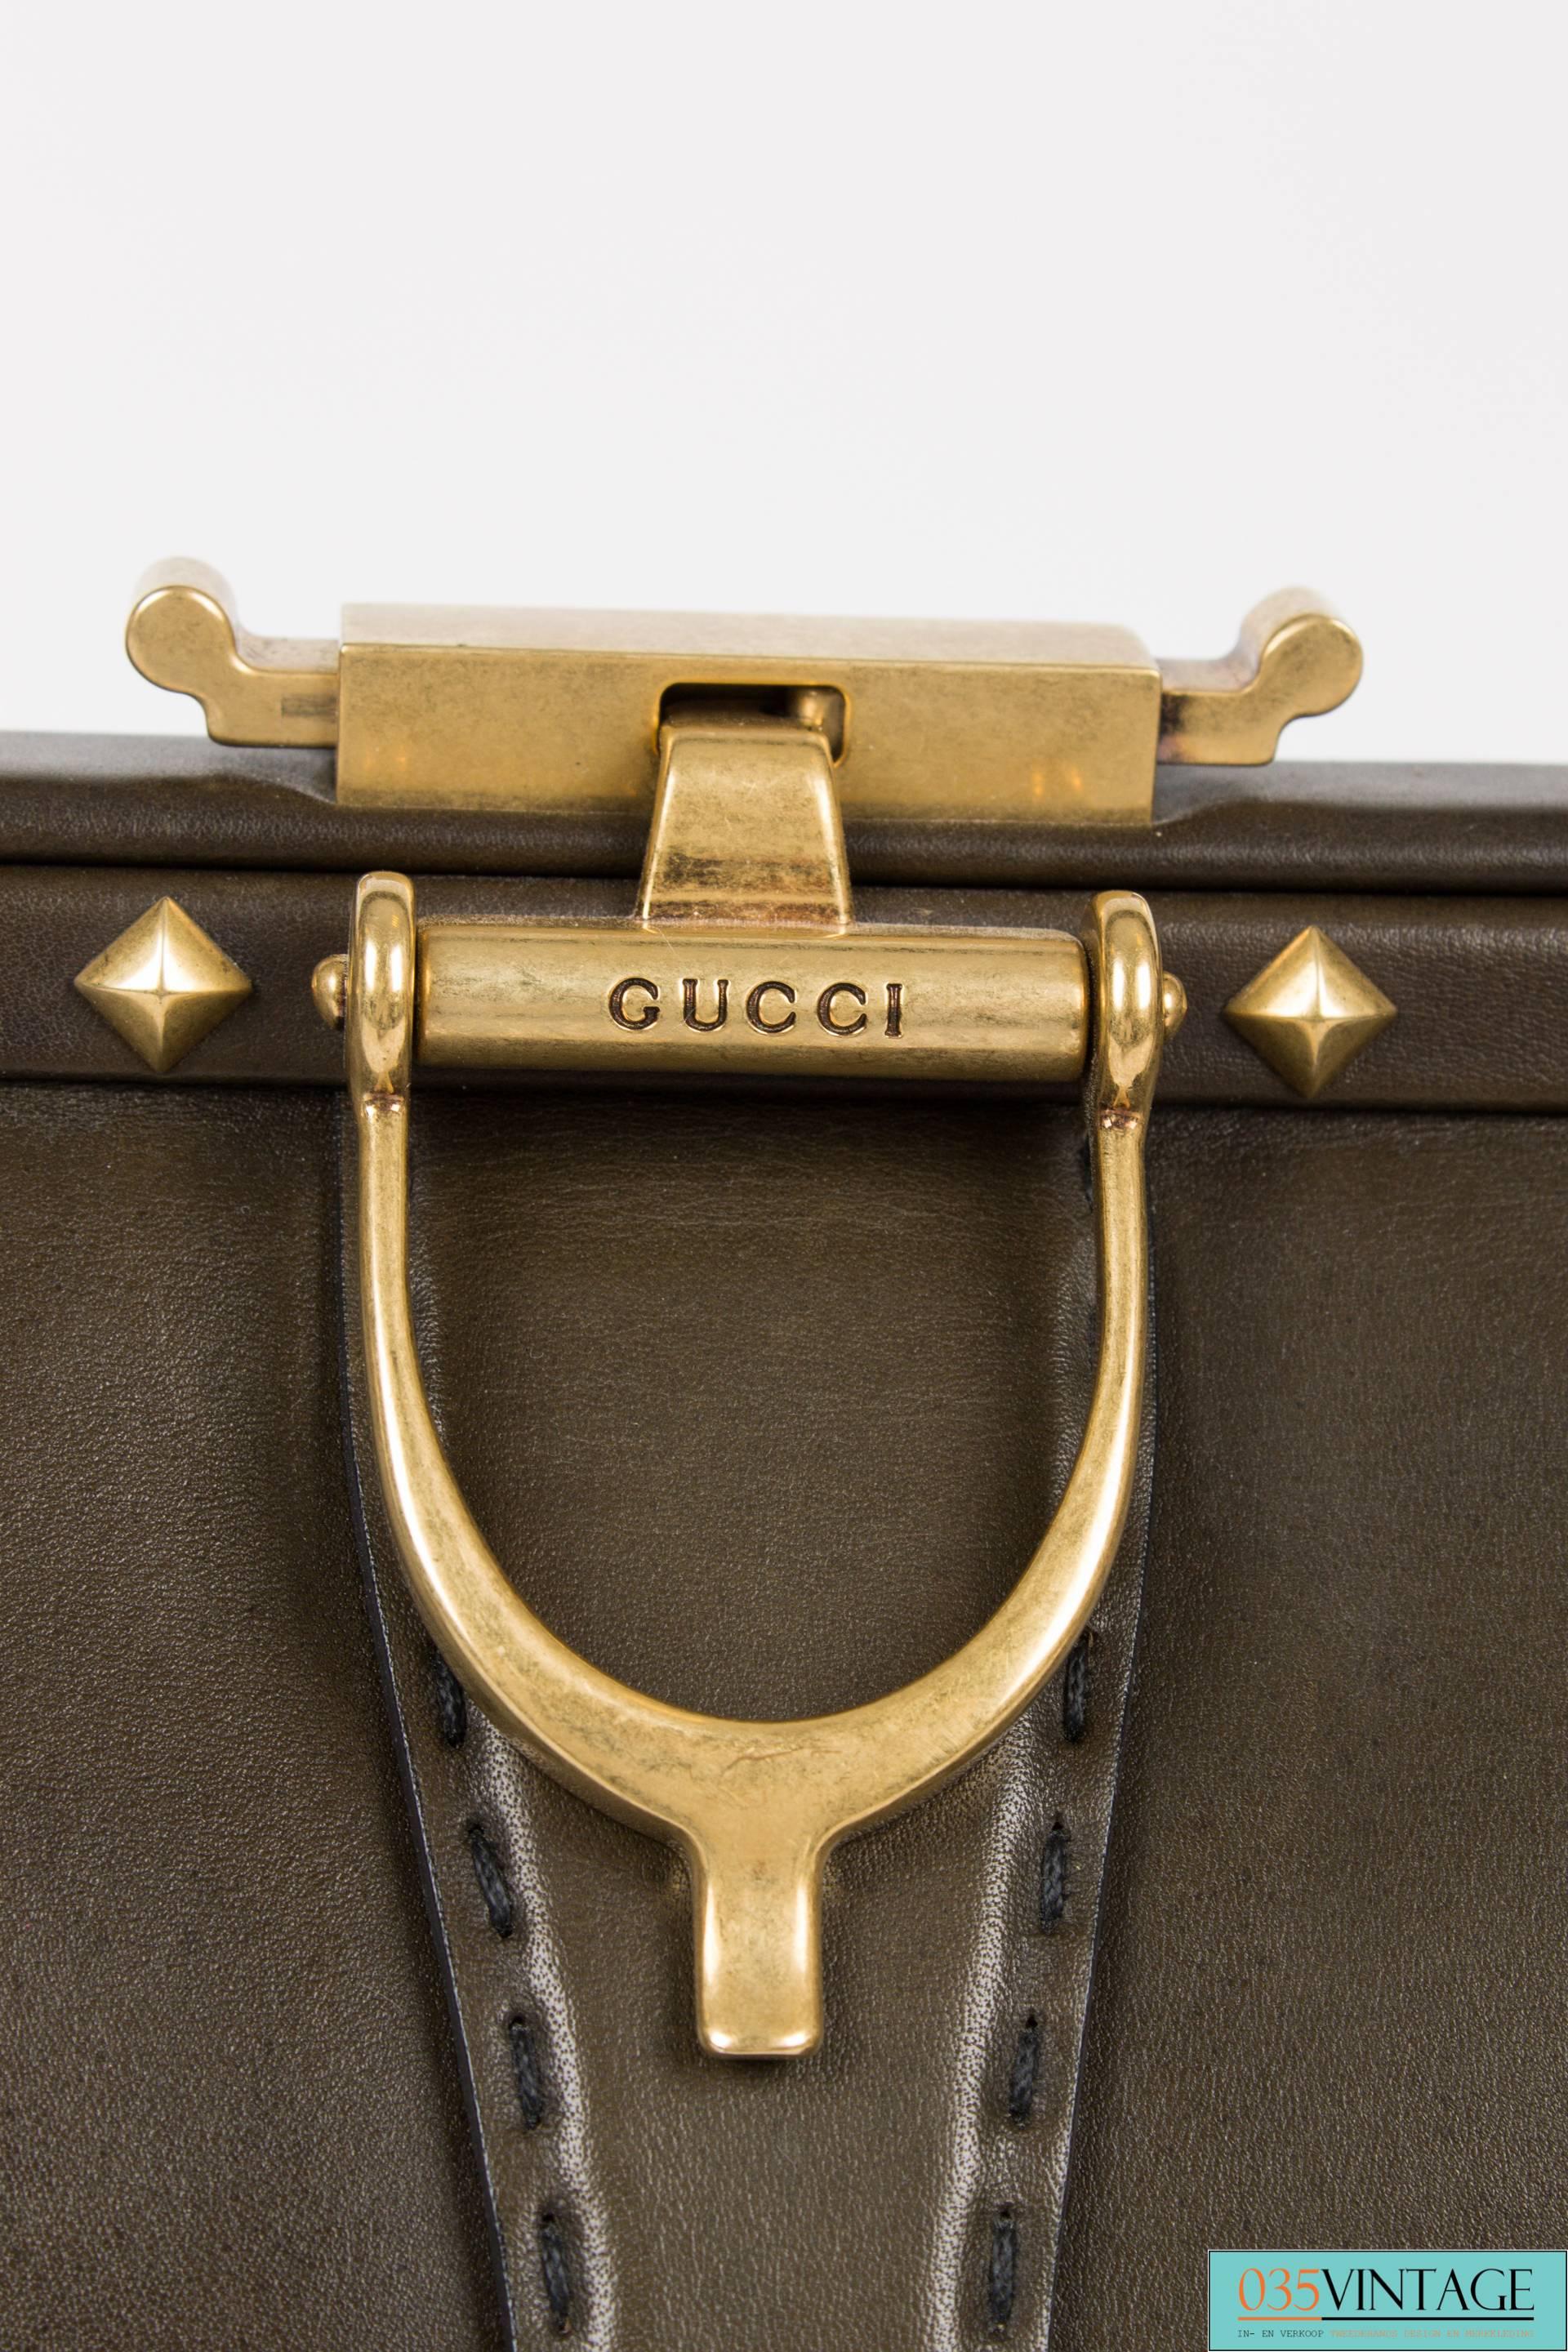 Gucci Lady Stirrup Top Handle Bag Limited Edition - dark green leather 3